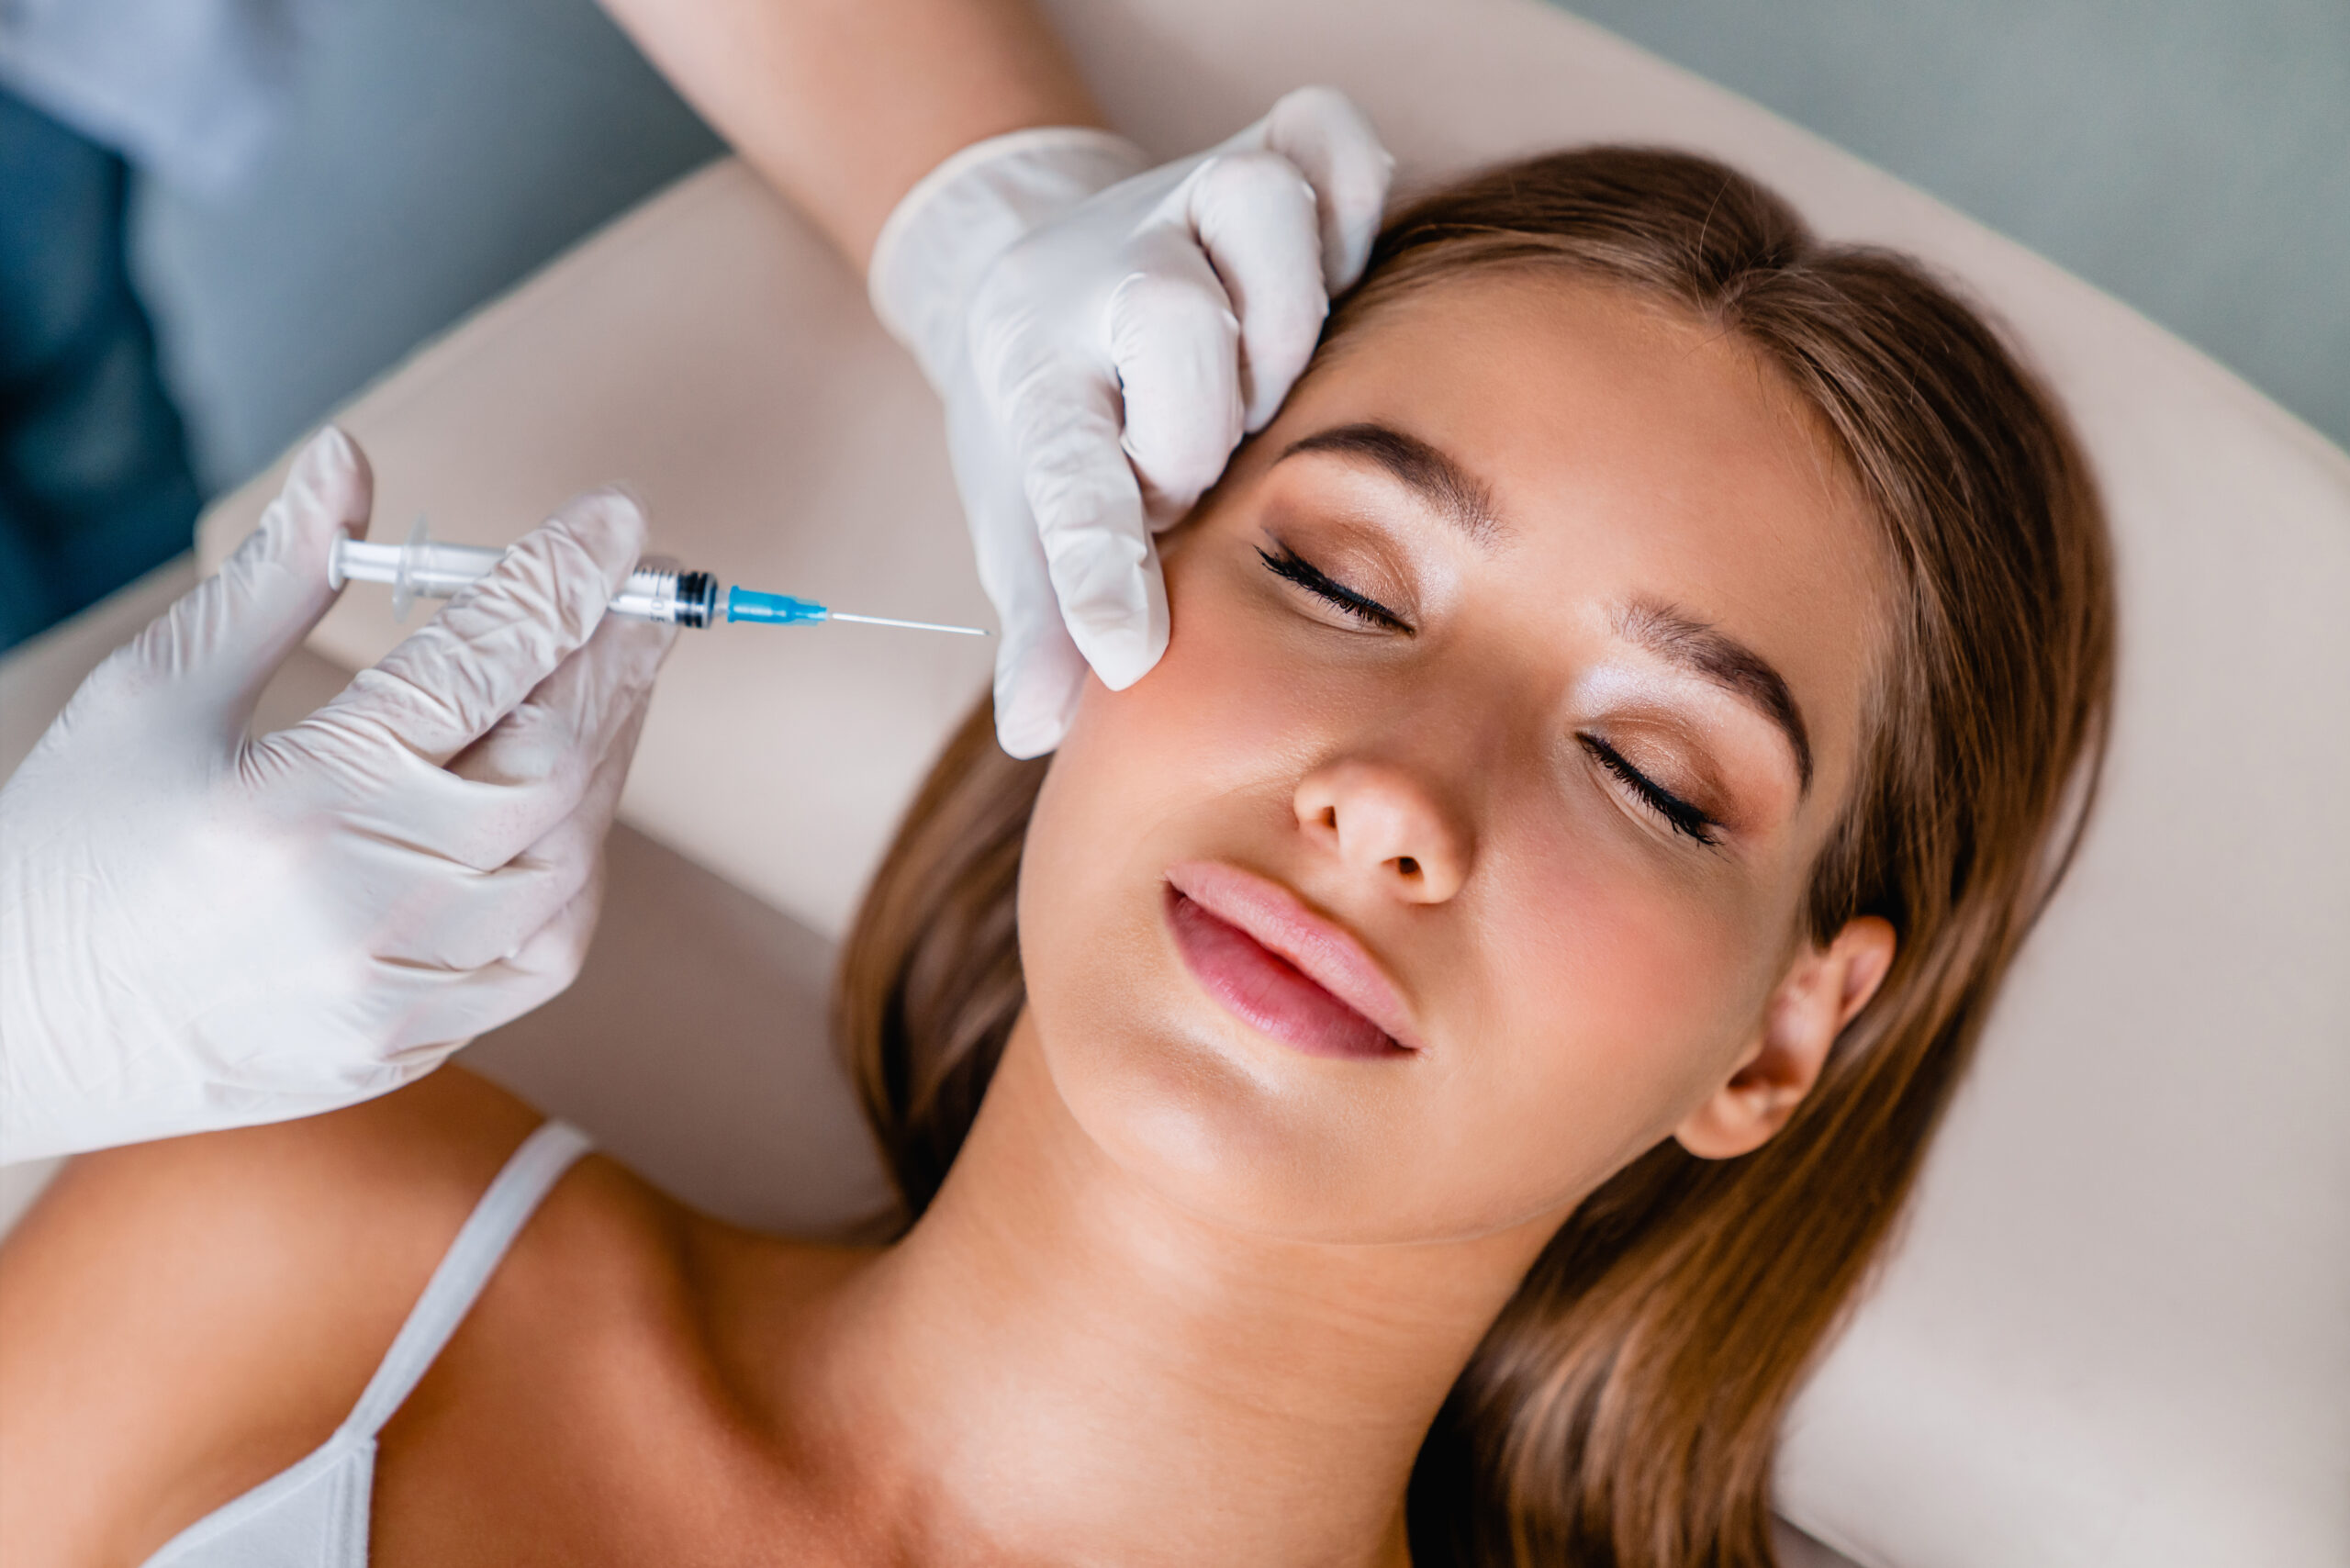 FDA approved areas for Botox?